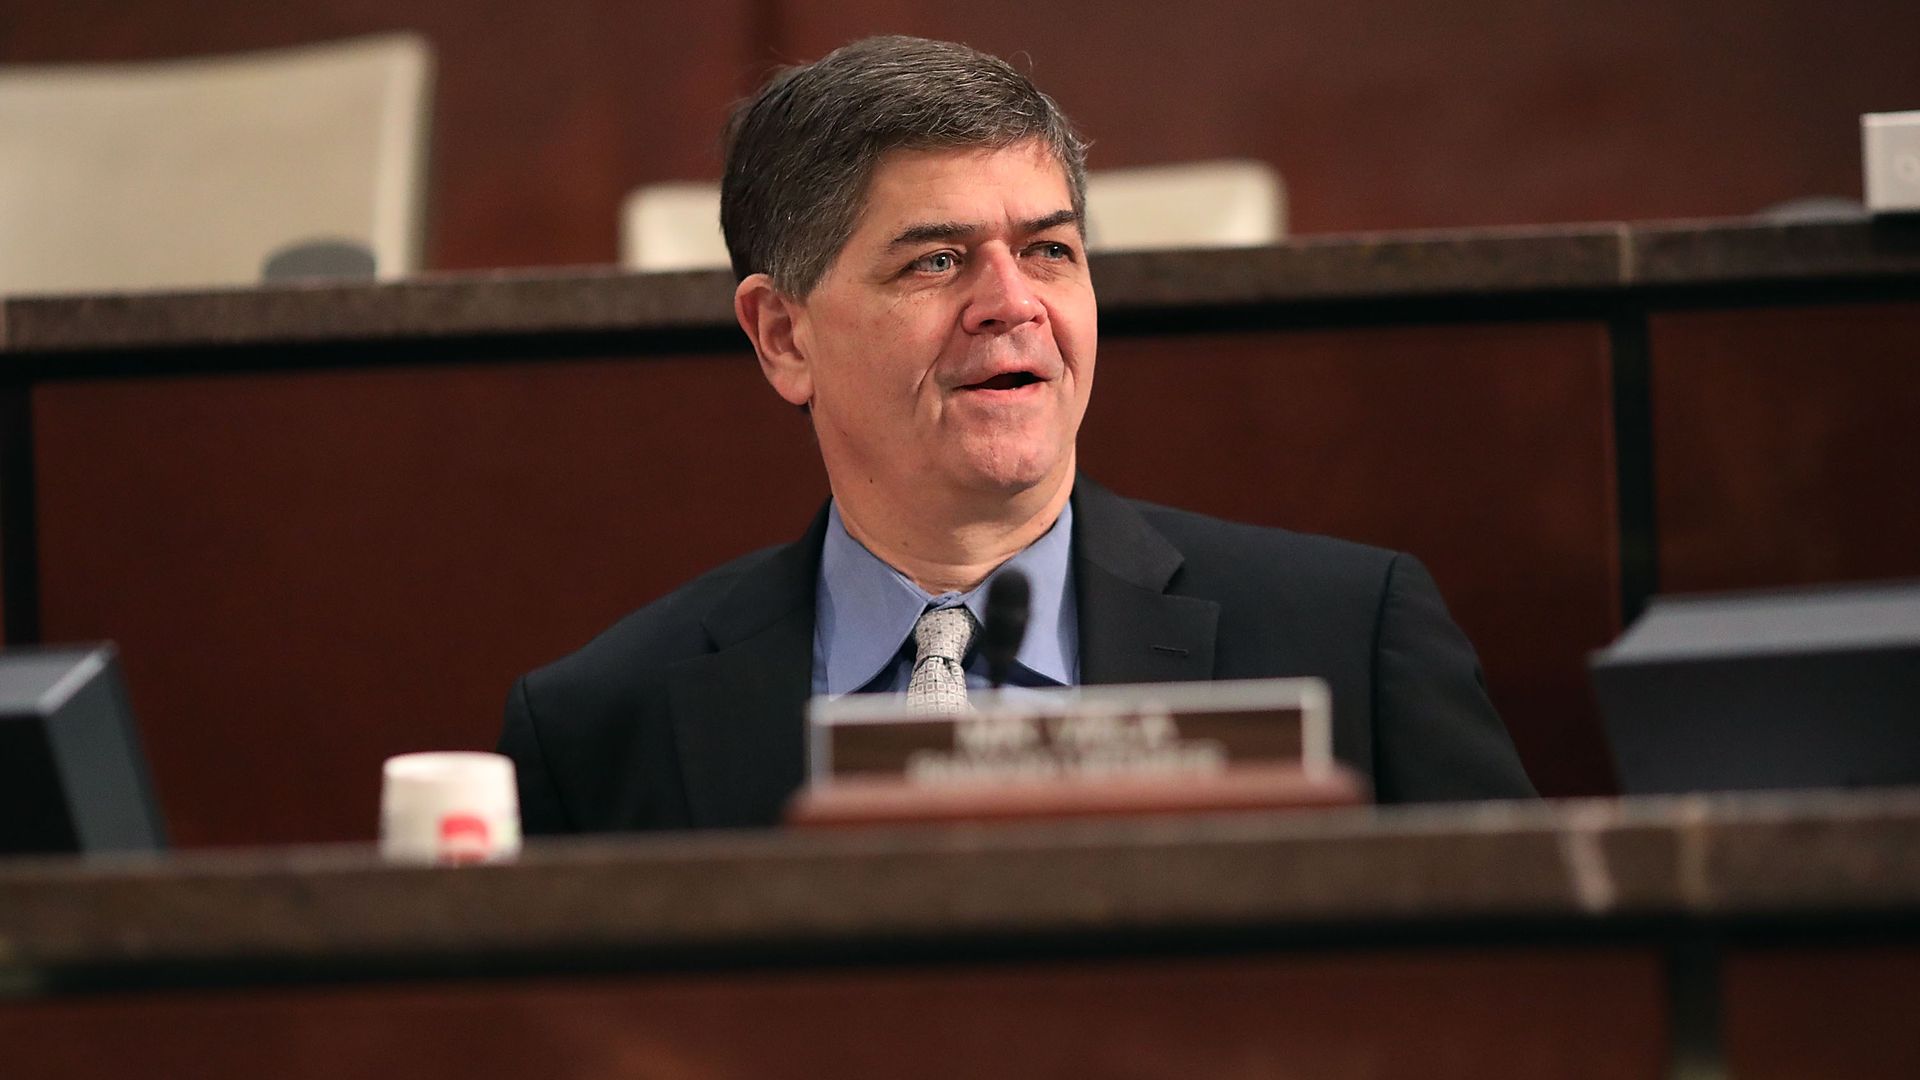 Rep. Filemon Vela is seen during a congressional hearing.